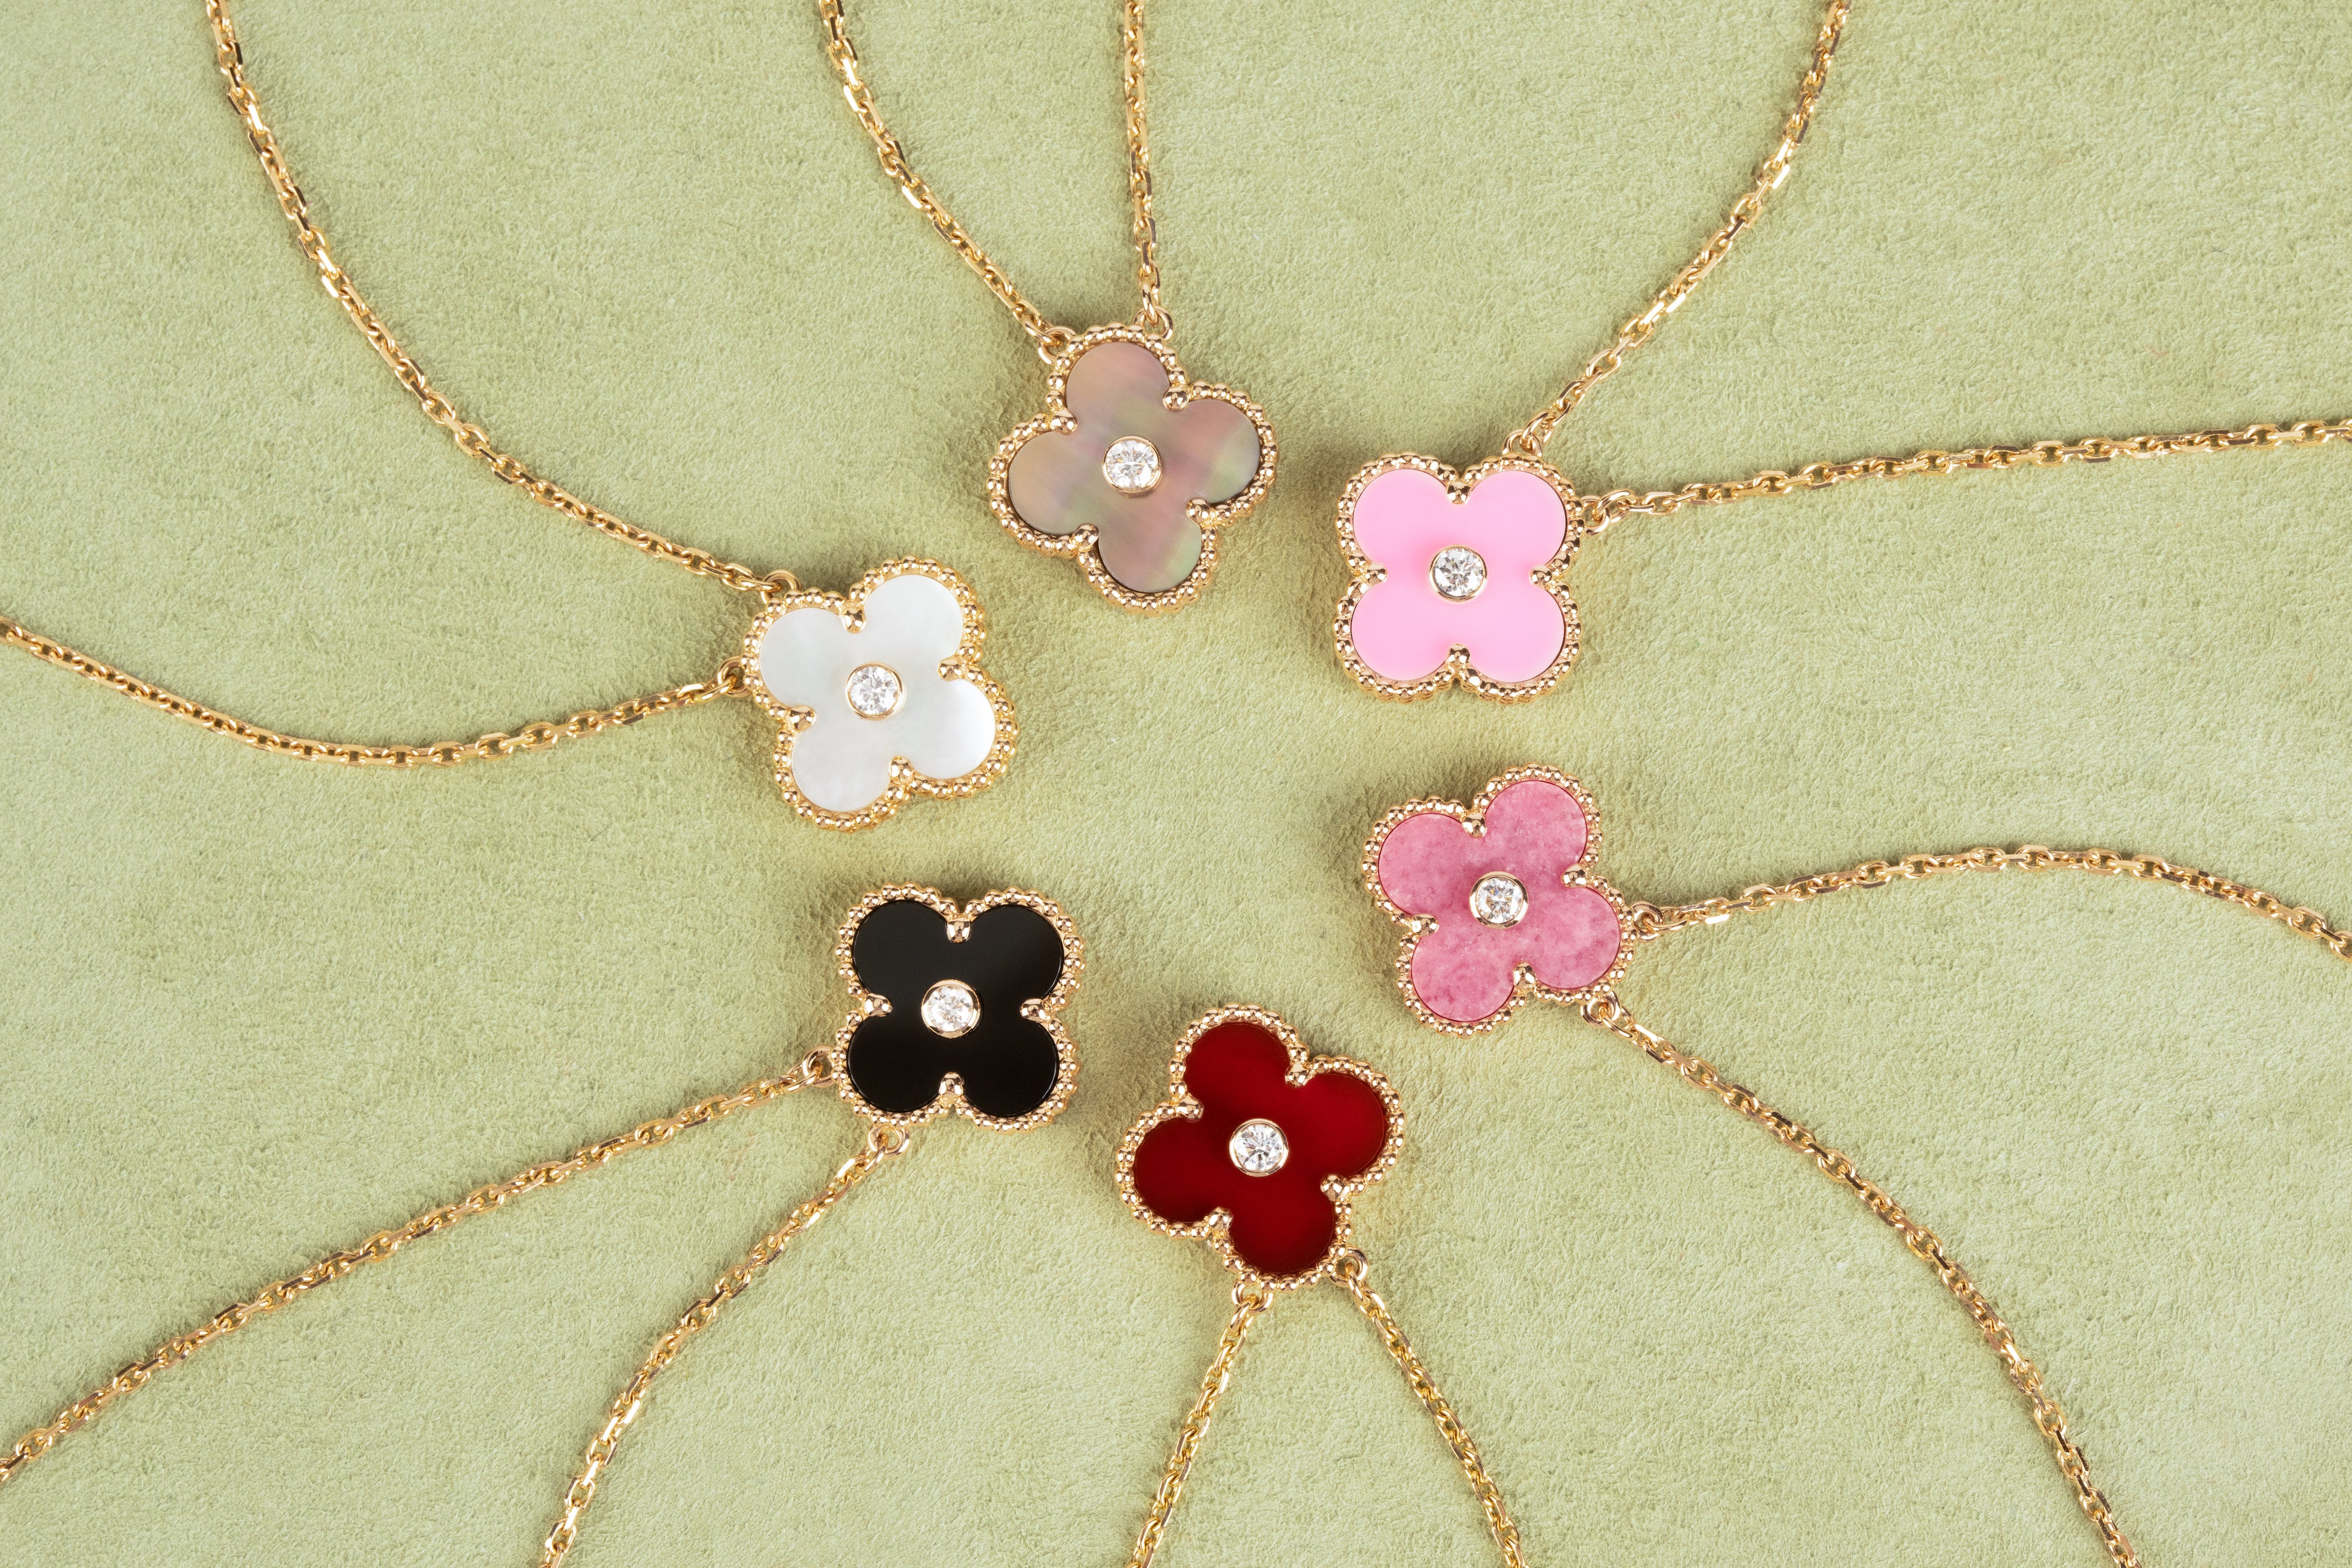 Van Cleef & Arpels Alhambra pendants are the lucky charms every